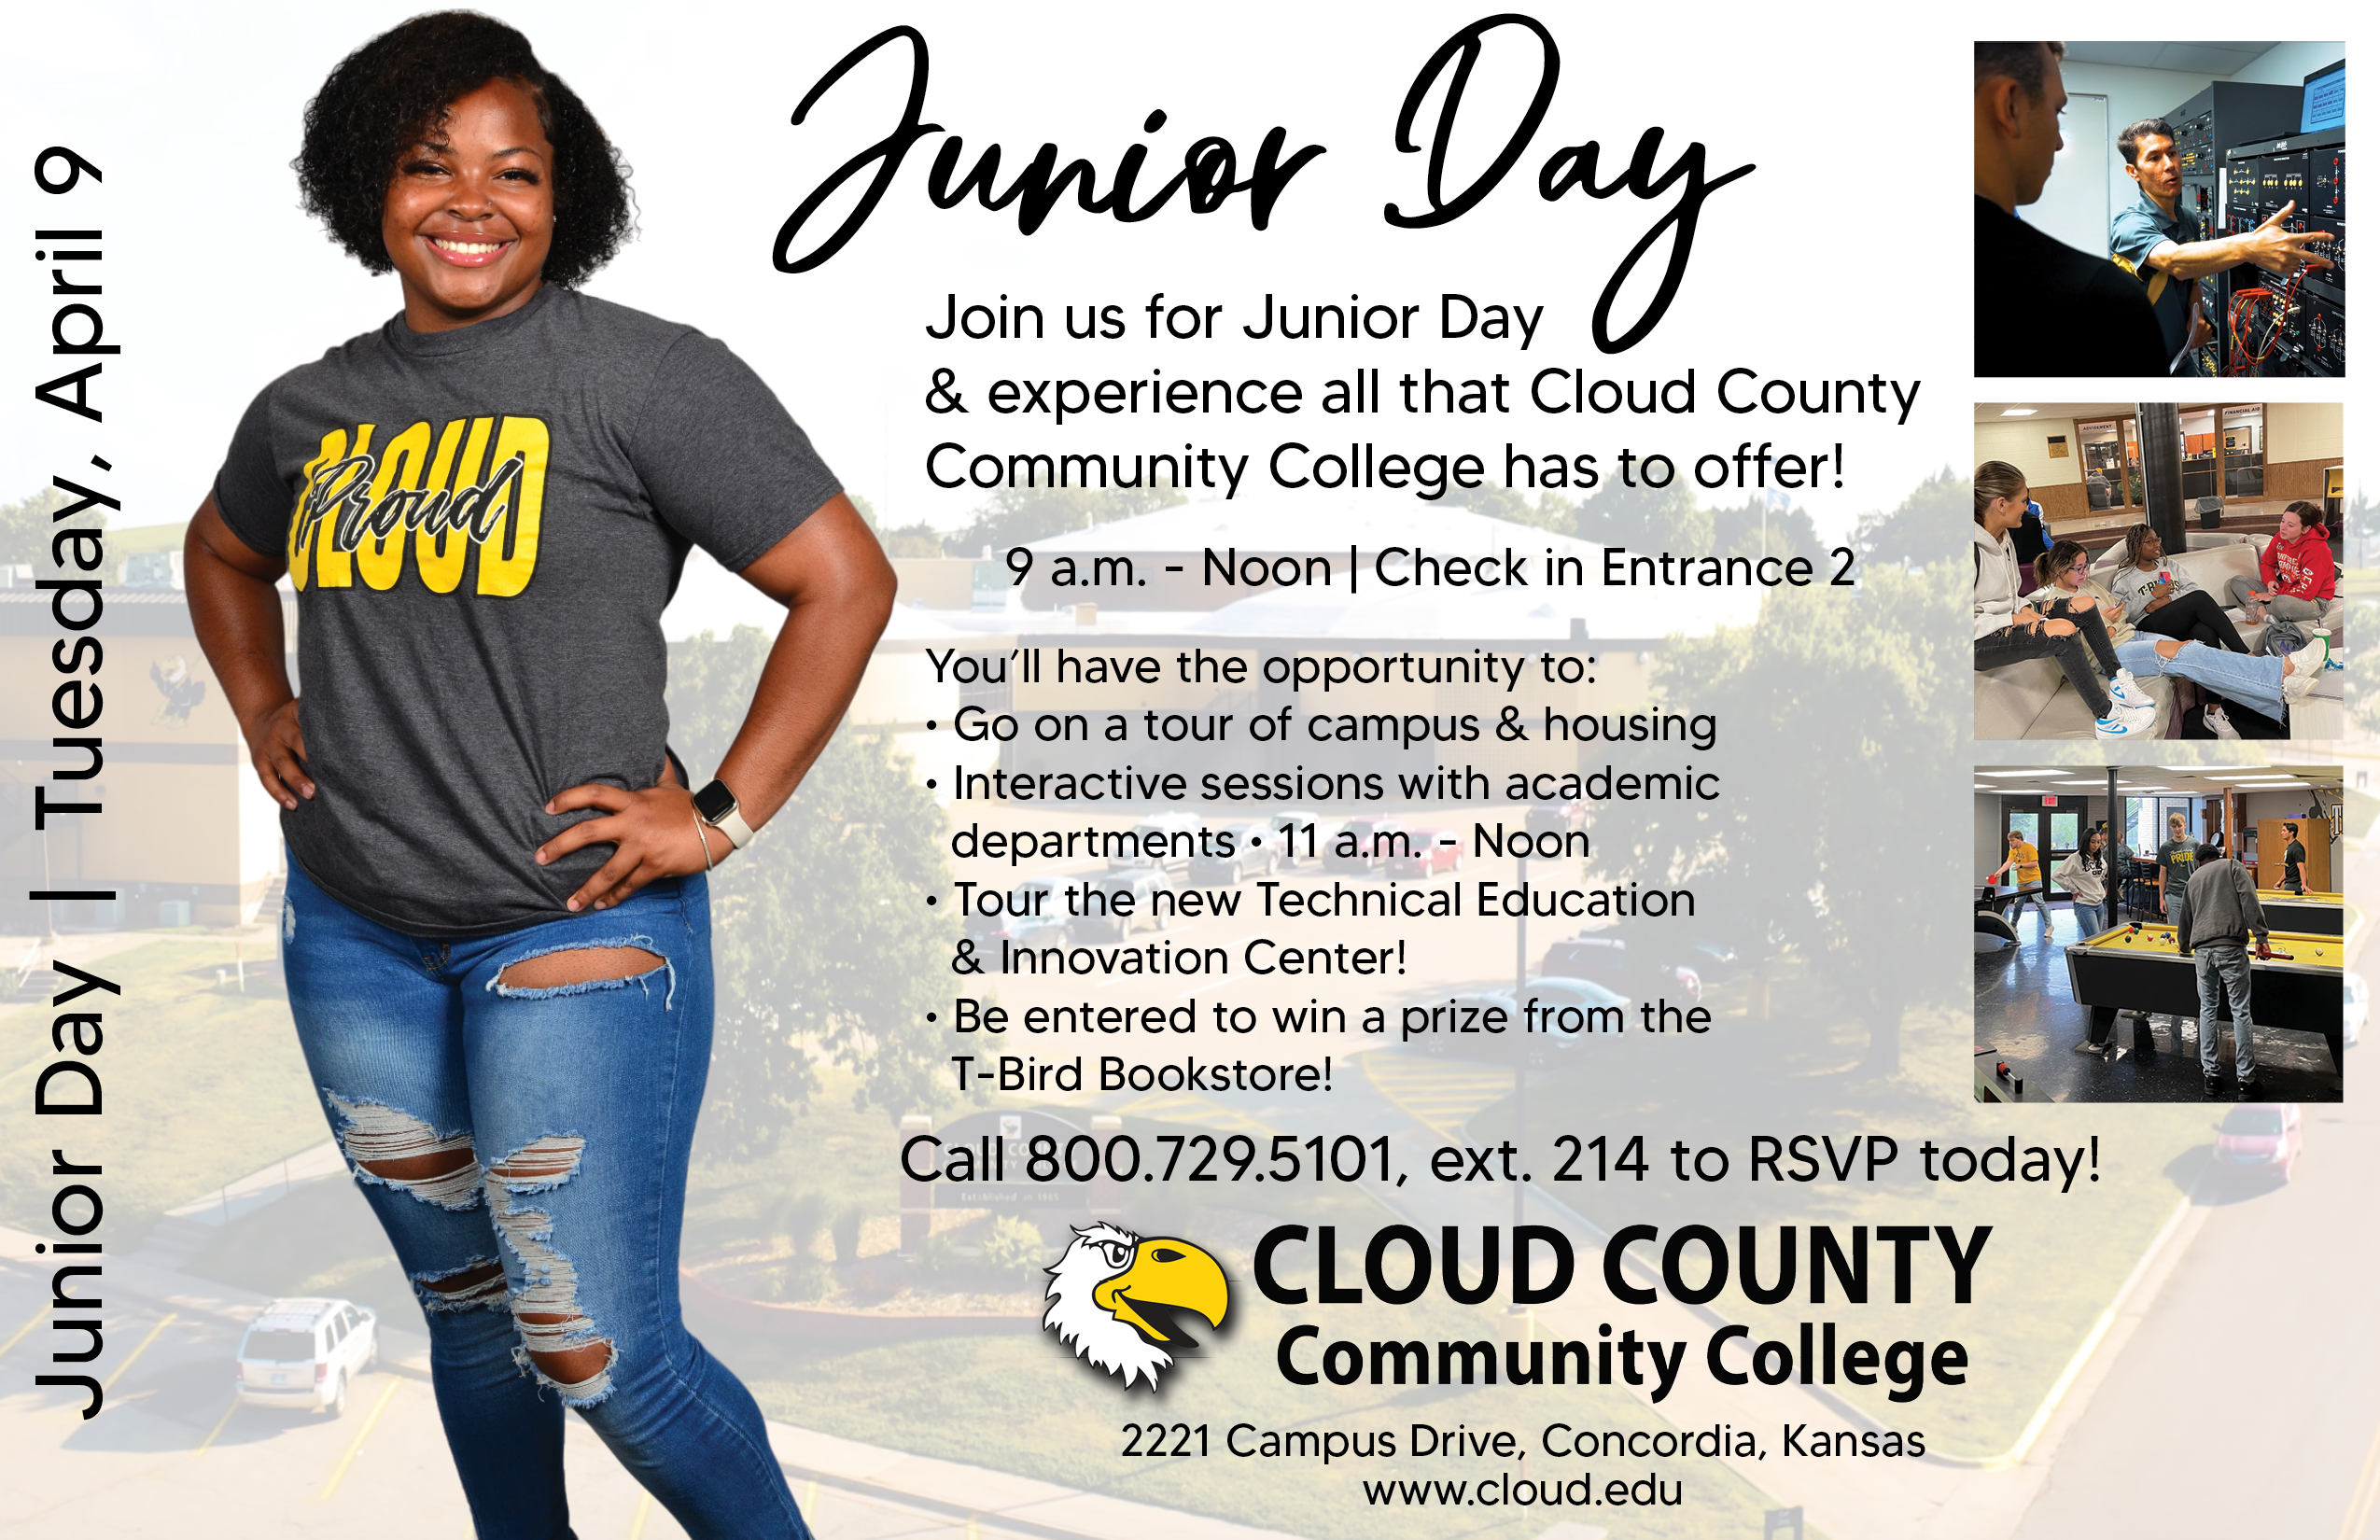 Junior Day is April 9.